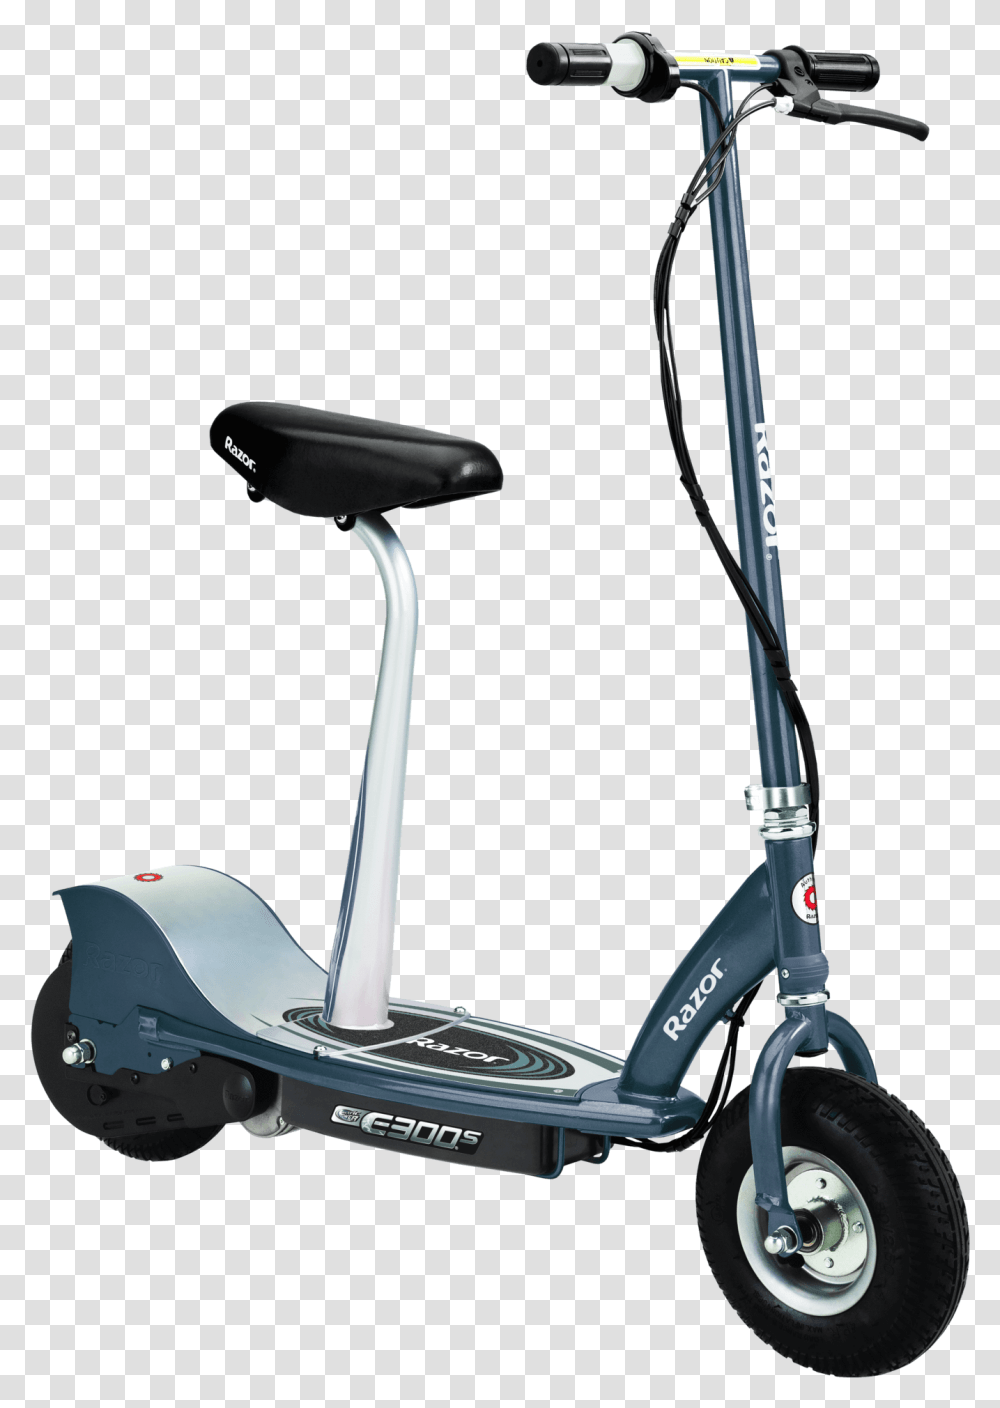 Razor Scooter Electric Scooter Price In India, Vehicle, Transportation, Lawn Mower, Tool Transparent Png